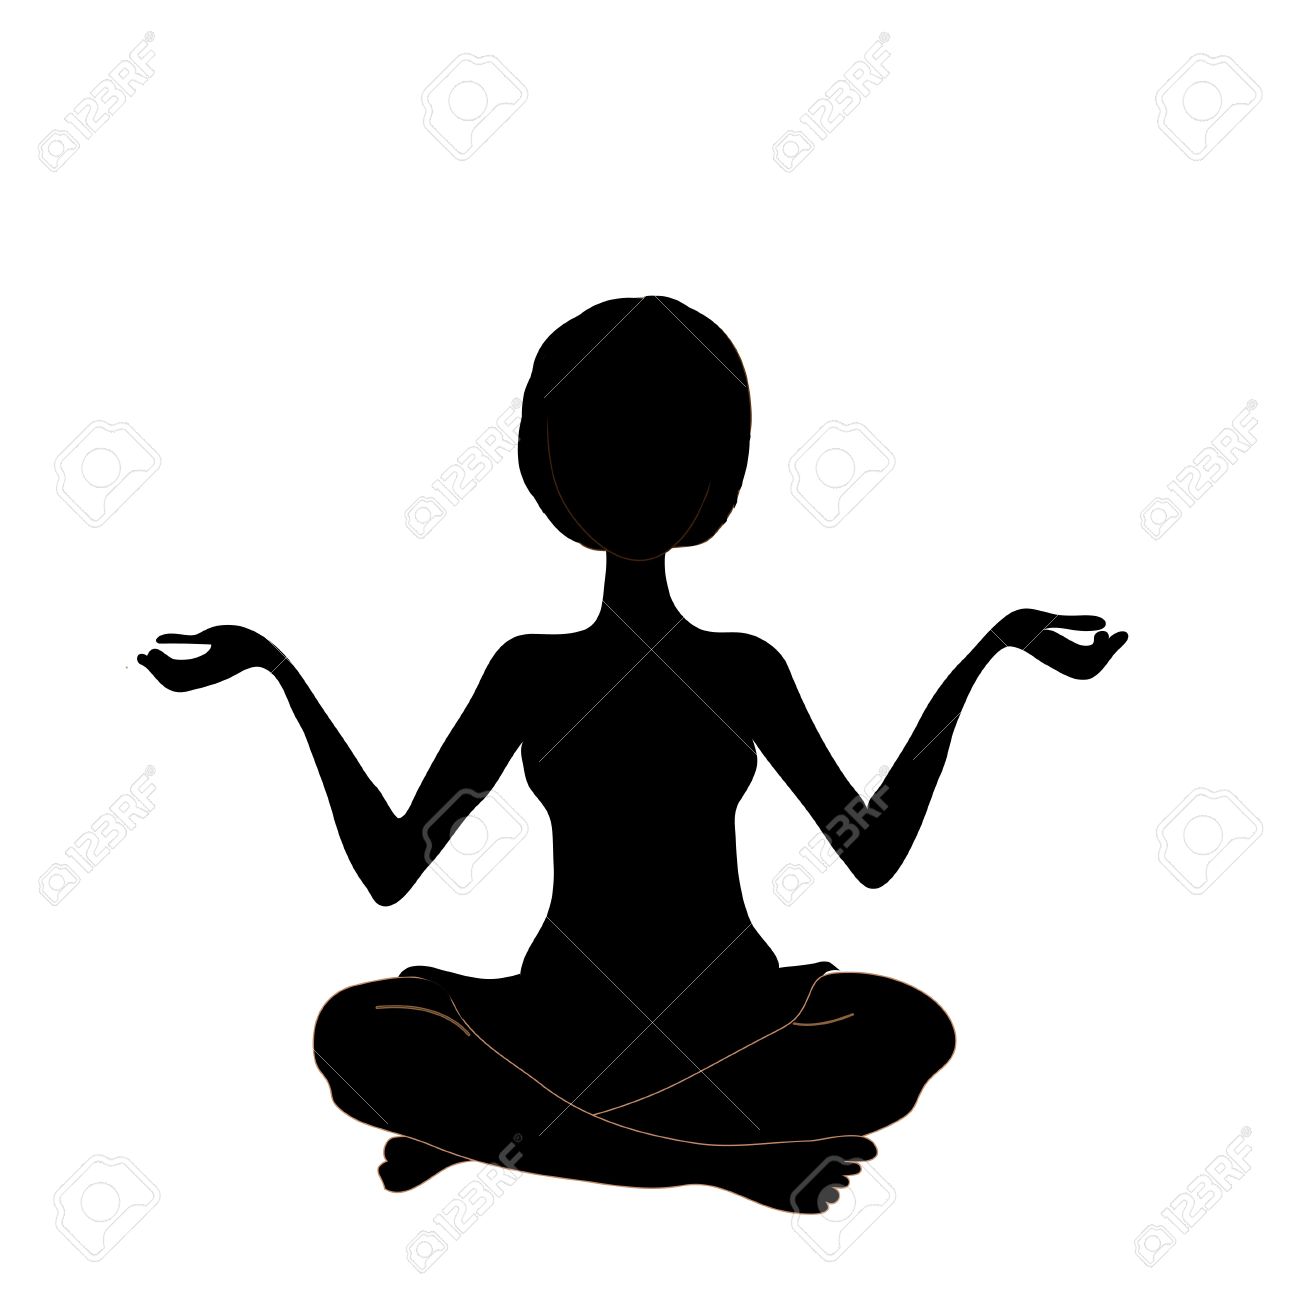 Silhouette Yoga On The White Bzckground Stock Photo Picture And